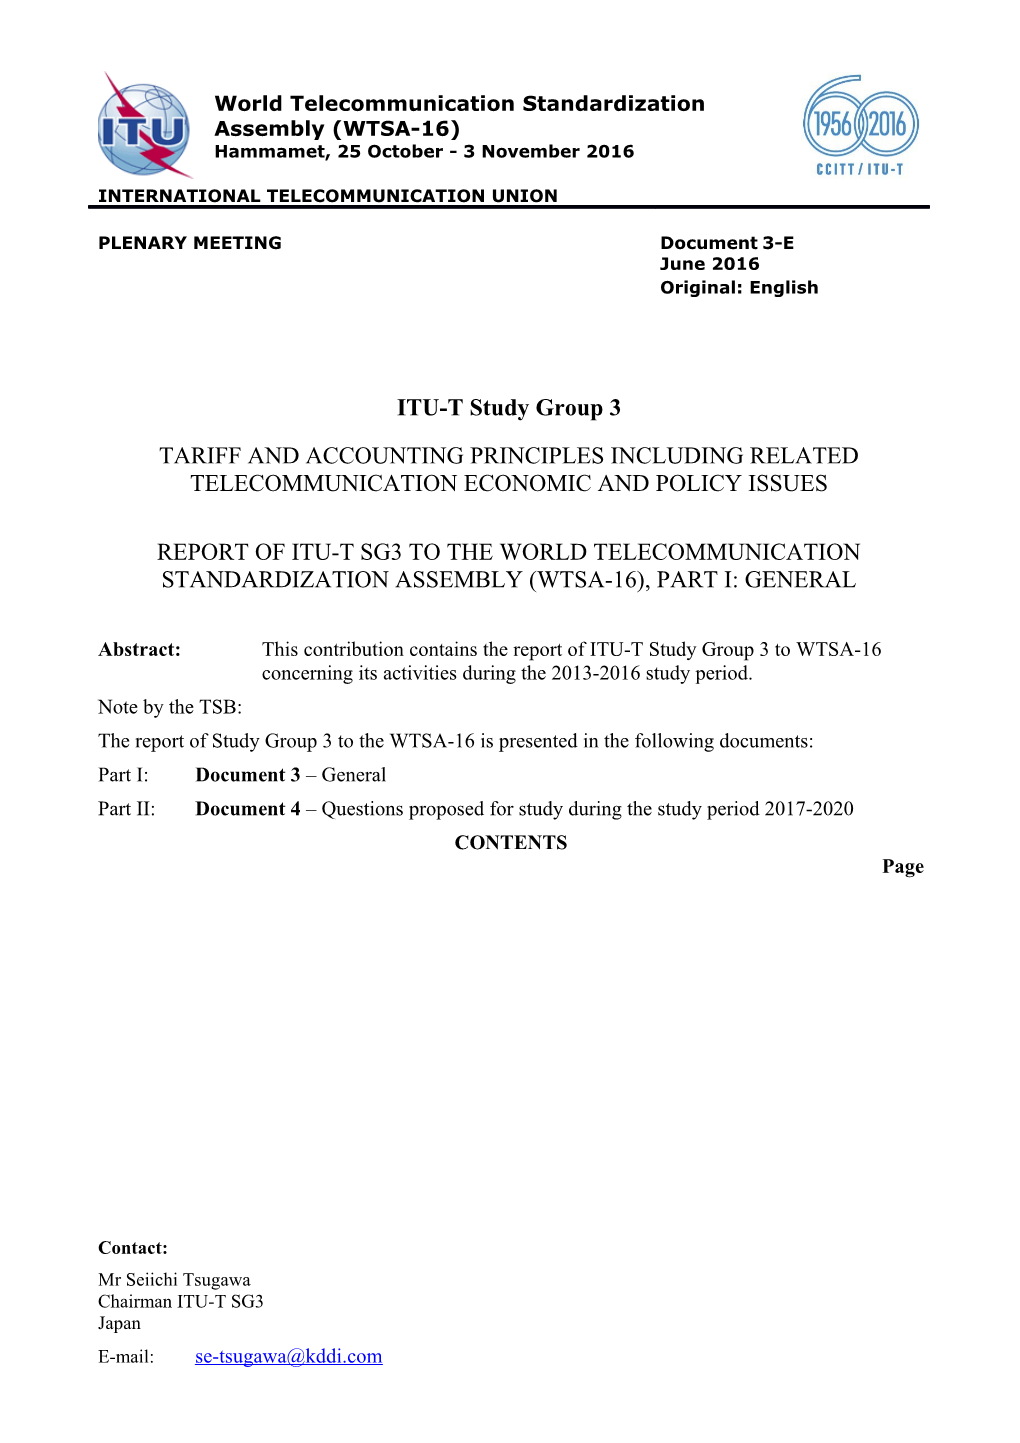 The Report of Study Group 3 to the WTSA-16 Is Presented in the Following Documents